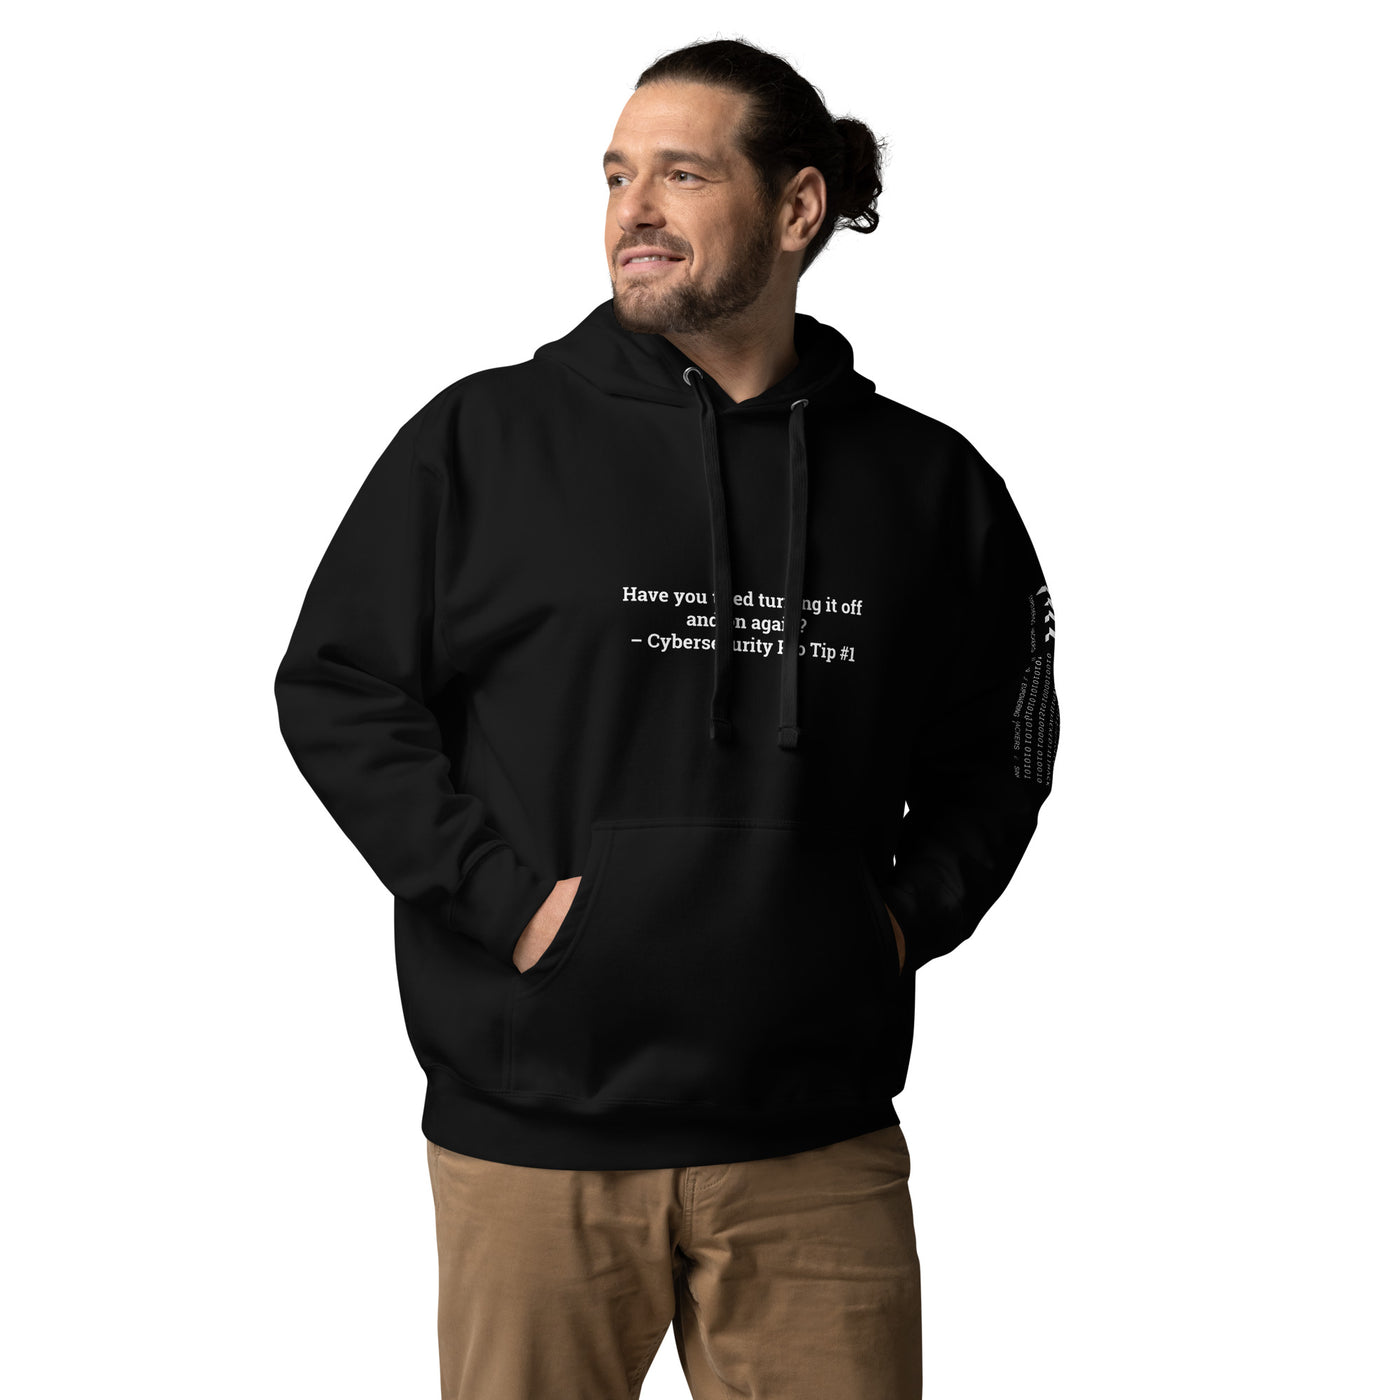 Have you Tried turning it off and on again Cybersecurity Pro Tip 1 V1 - Unisex Hoodie